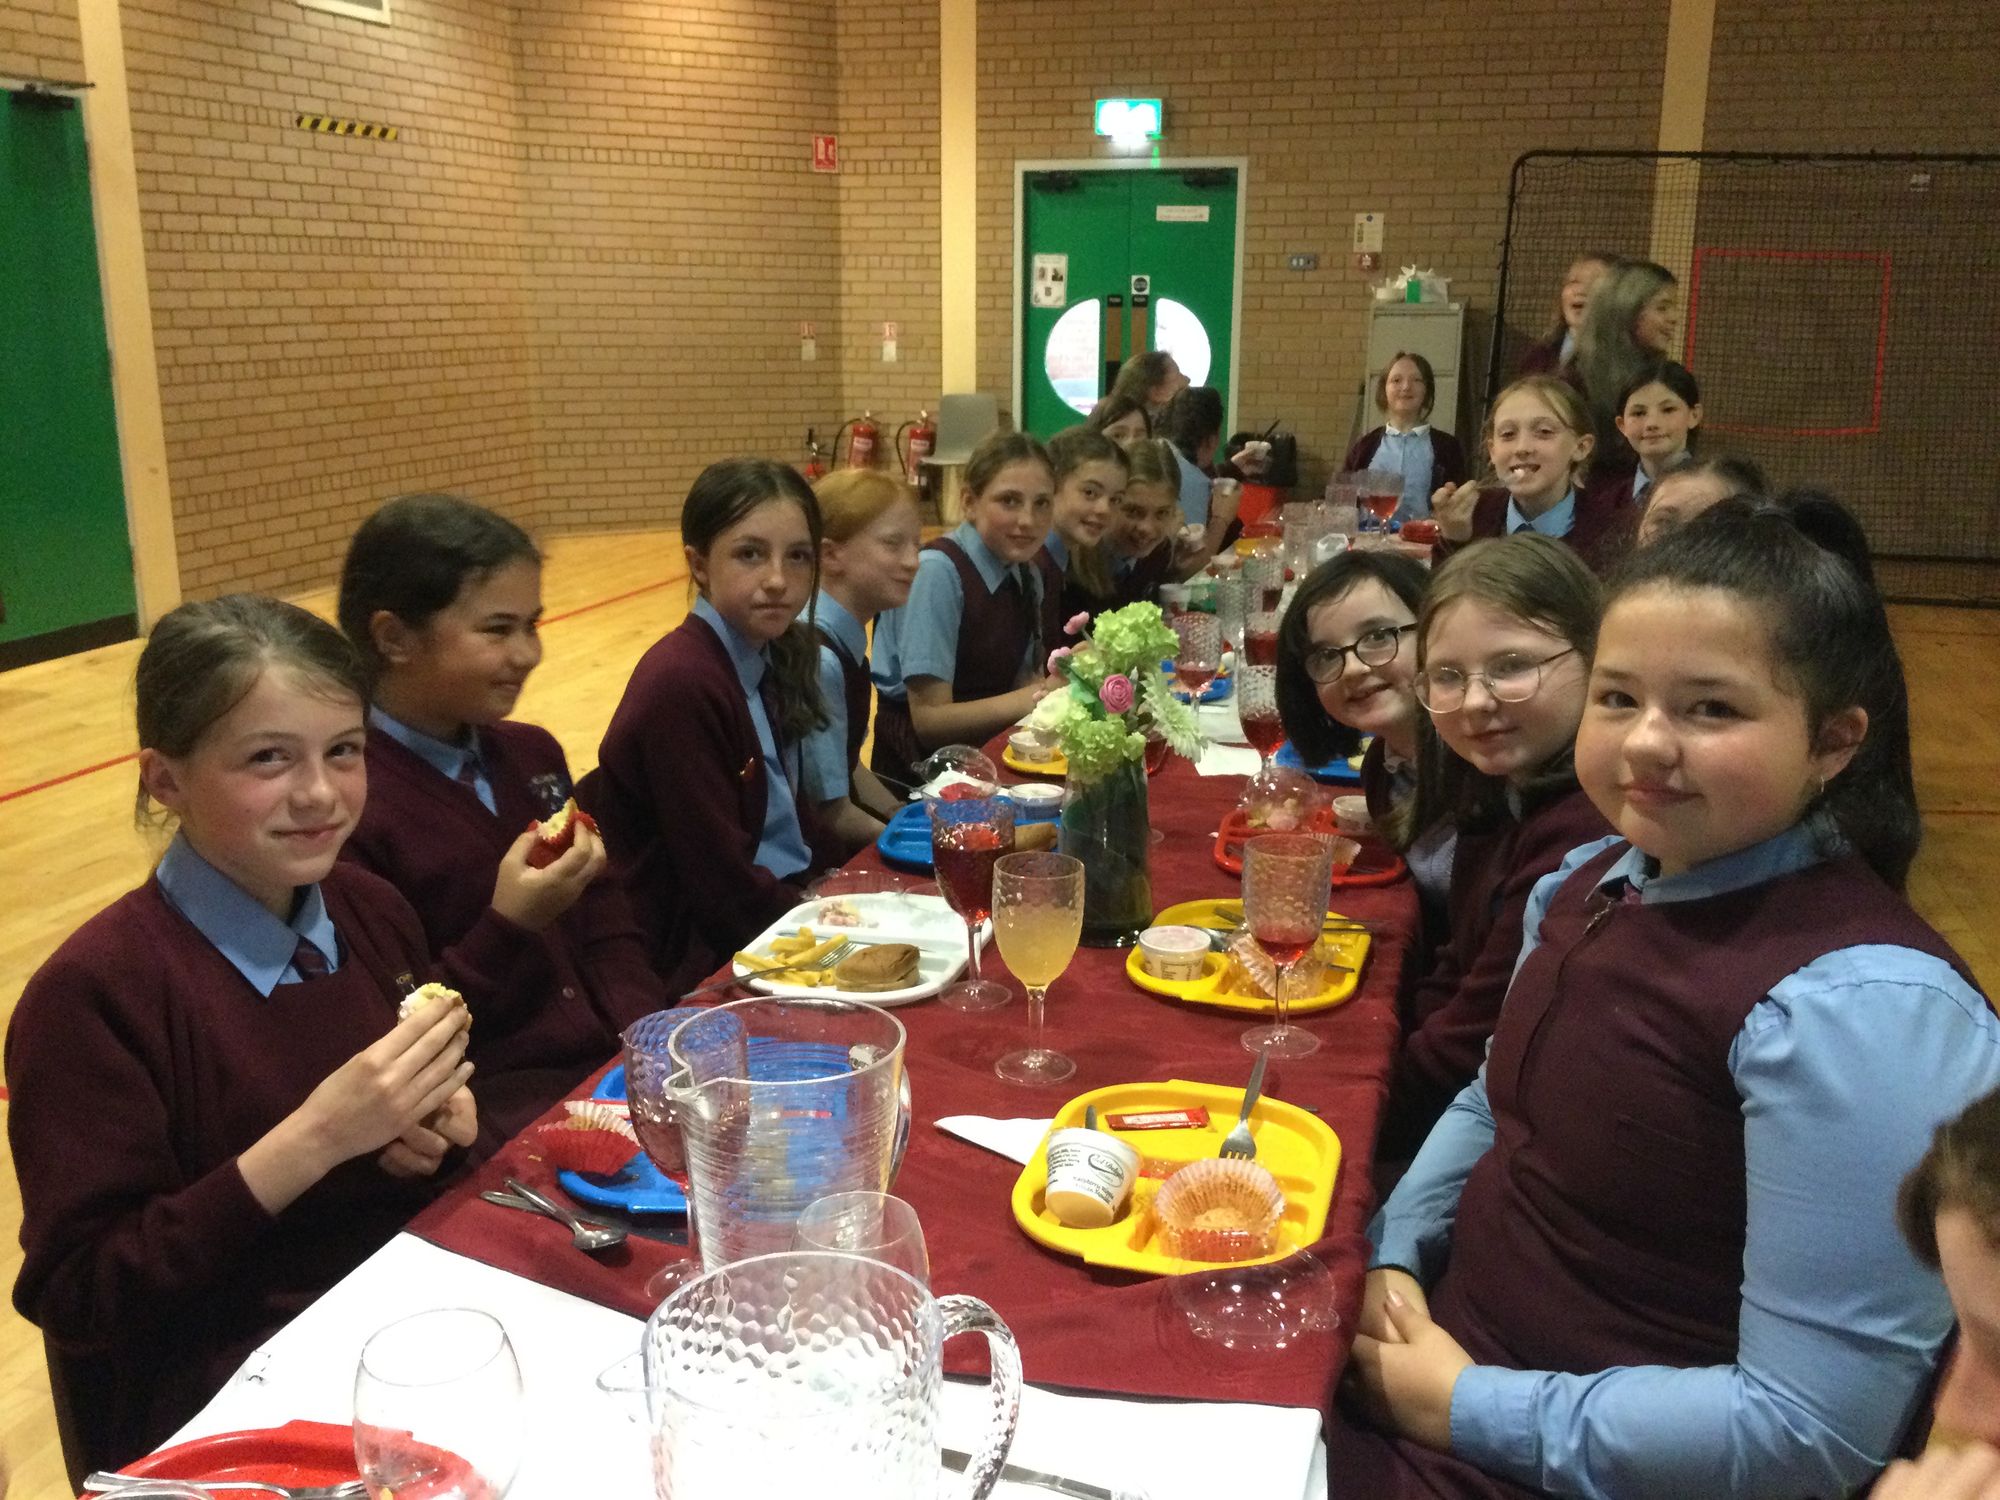 Year 7 Lunch